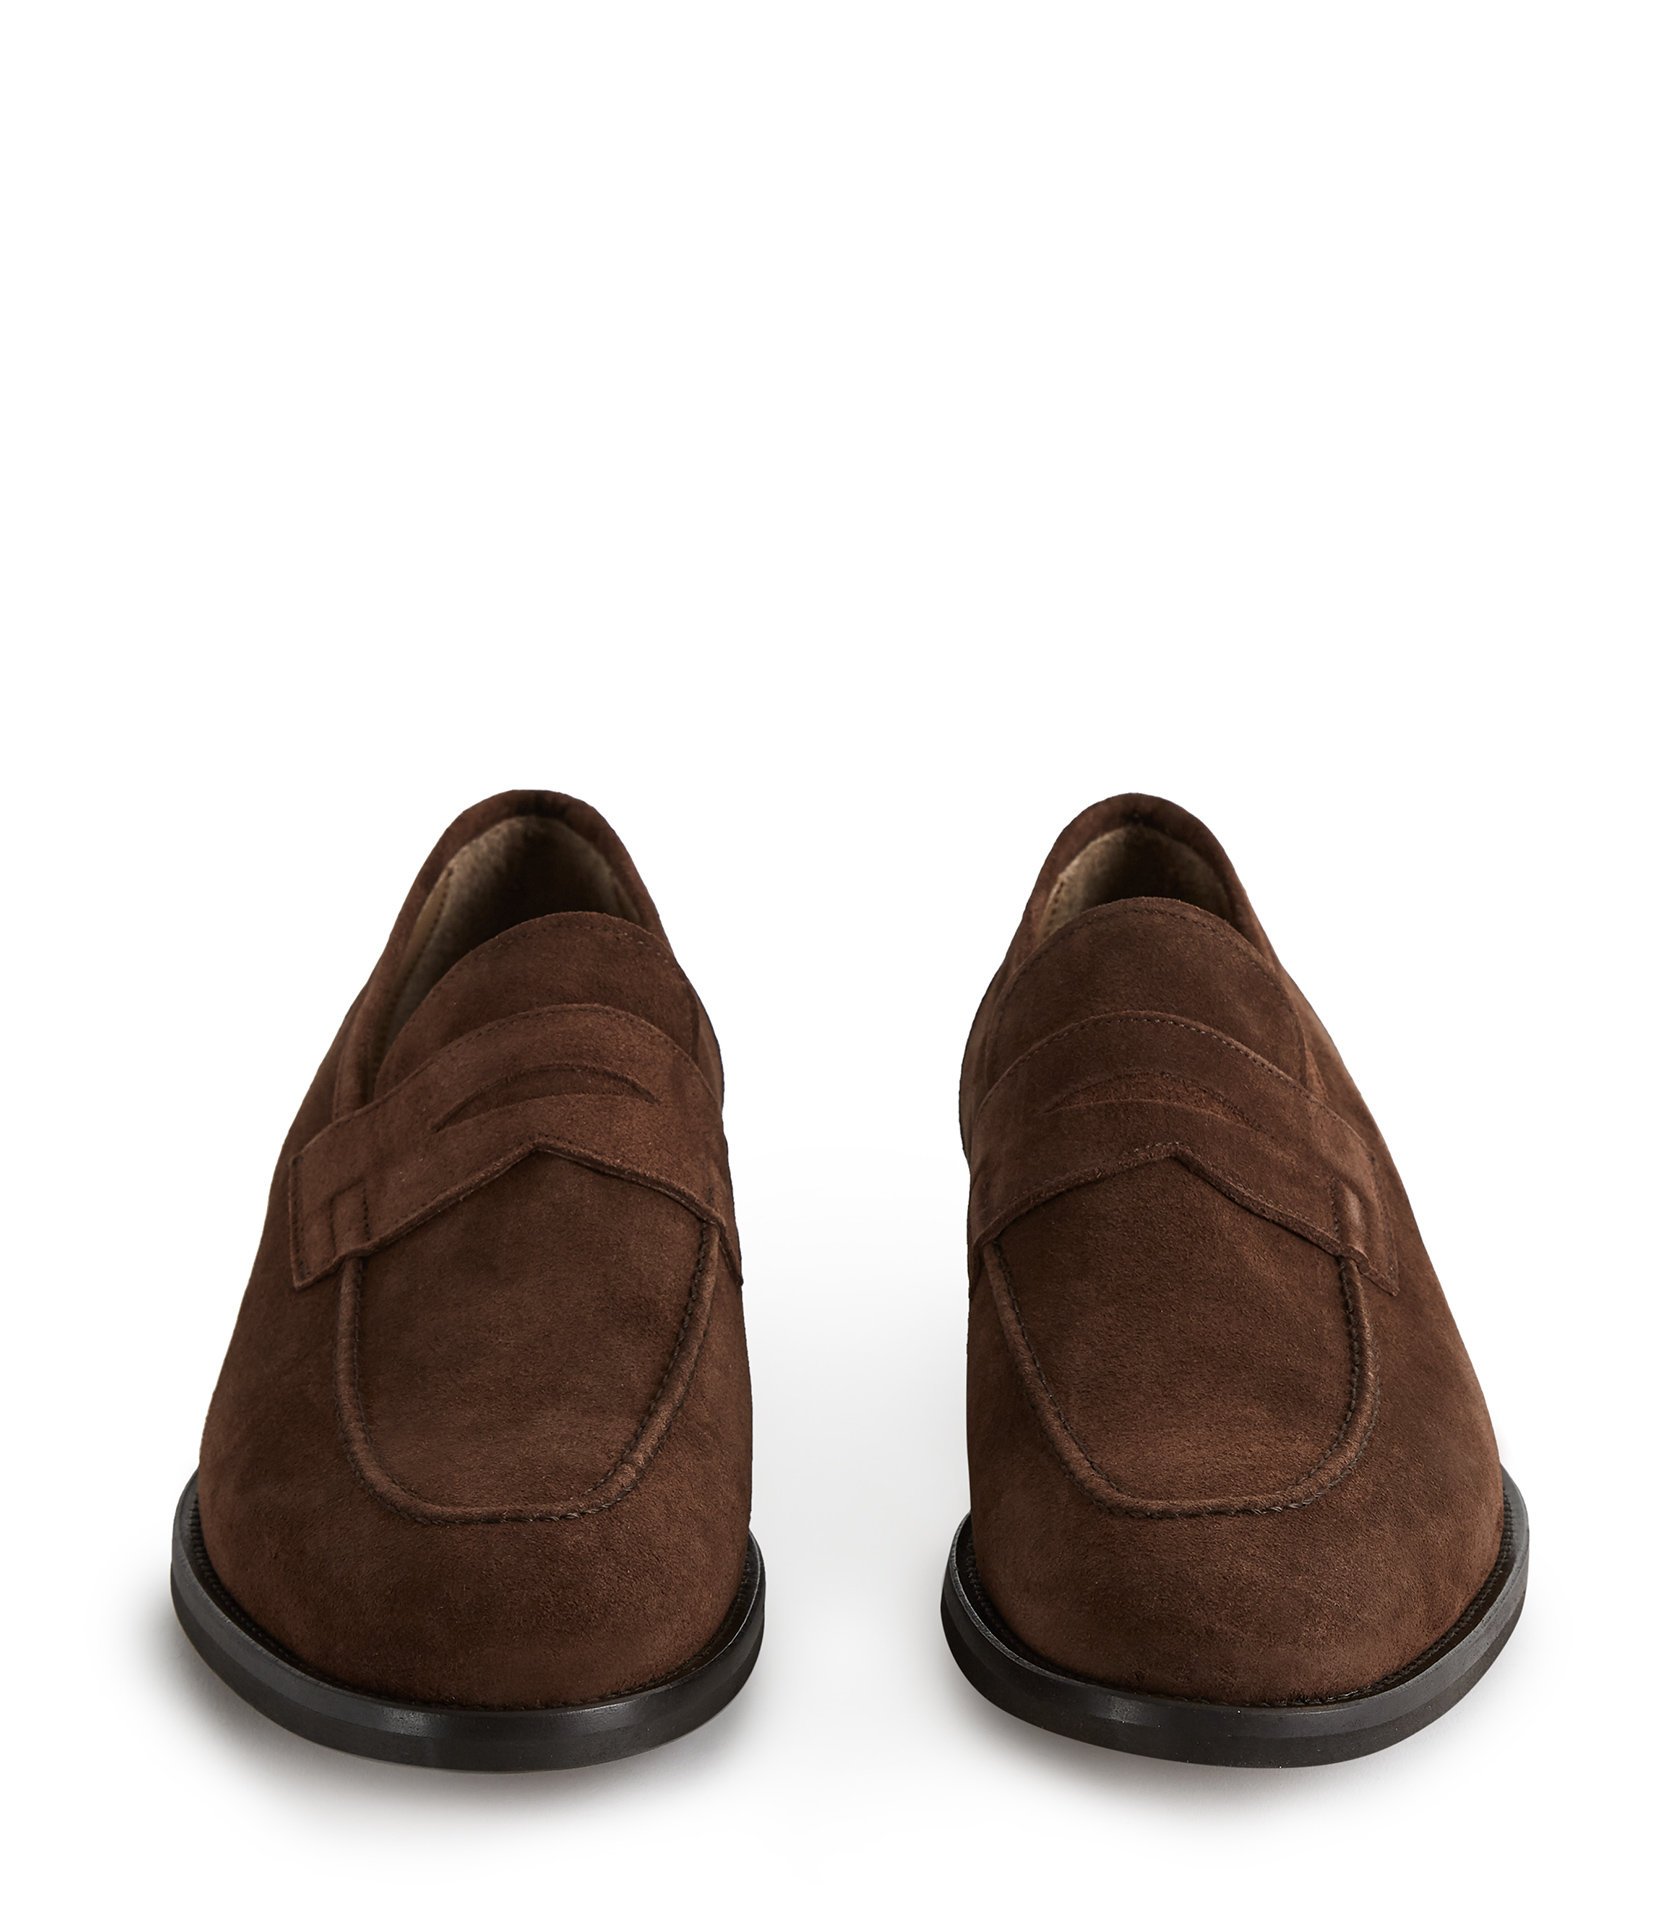 Reiss Brown Shoes